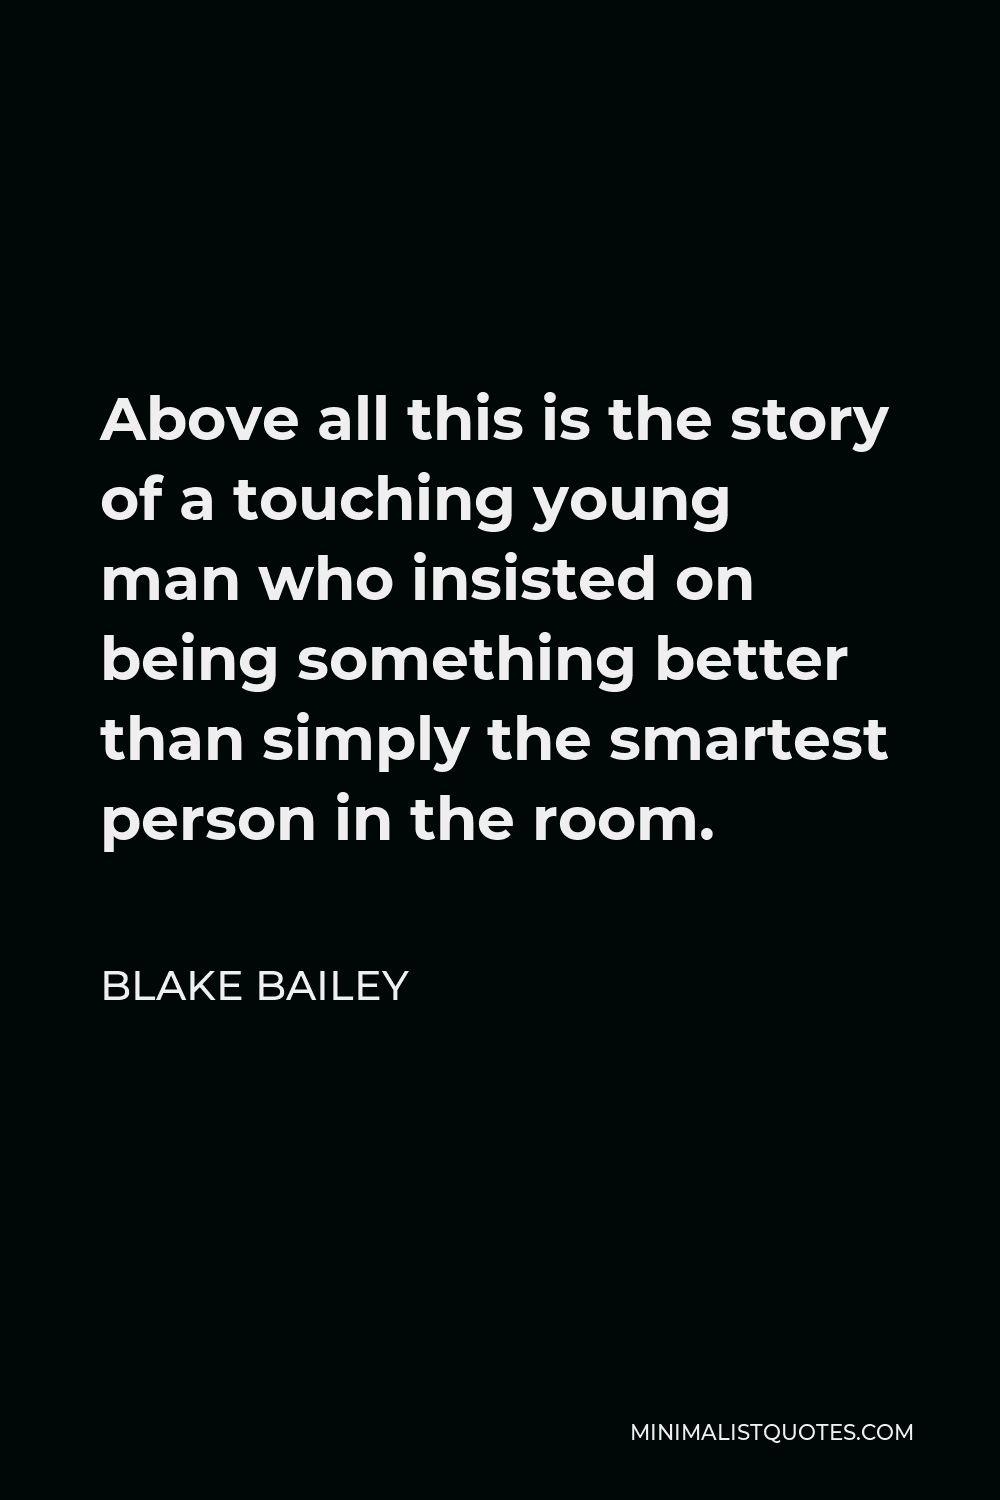 Blake Bailey Quote - Above all this is the story of a touching young man who insisted on being something better than simply the smartest person in the room.